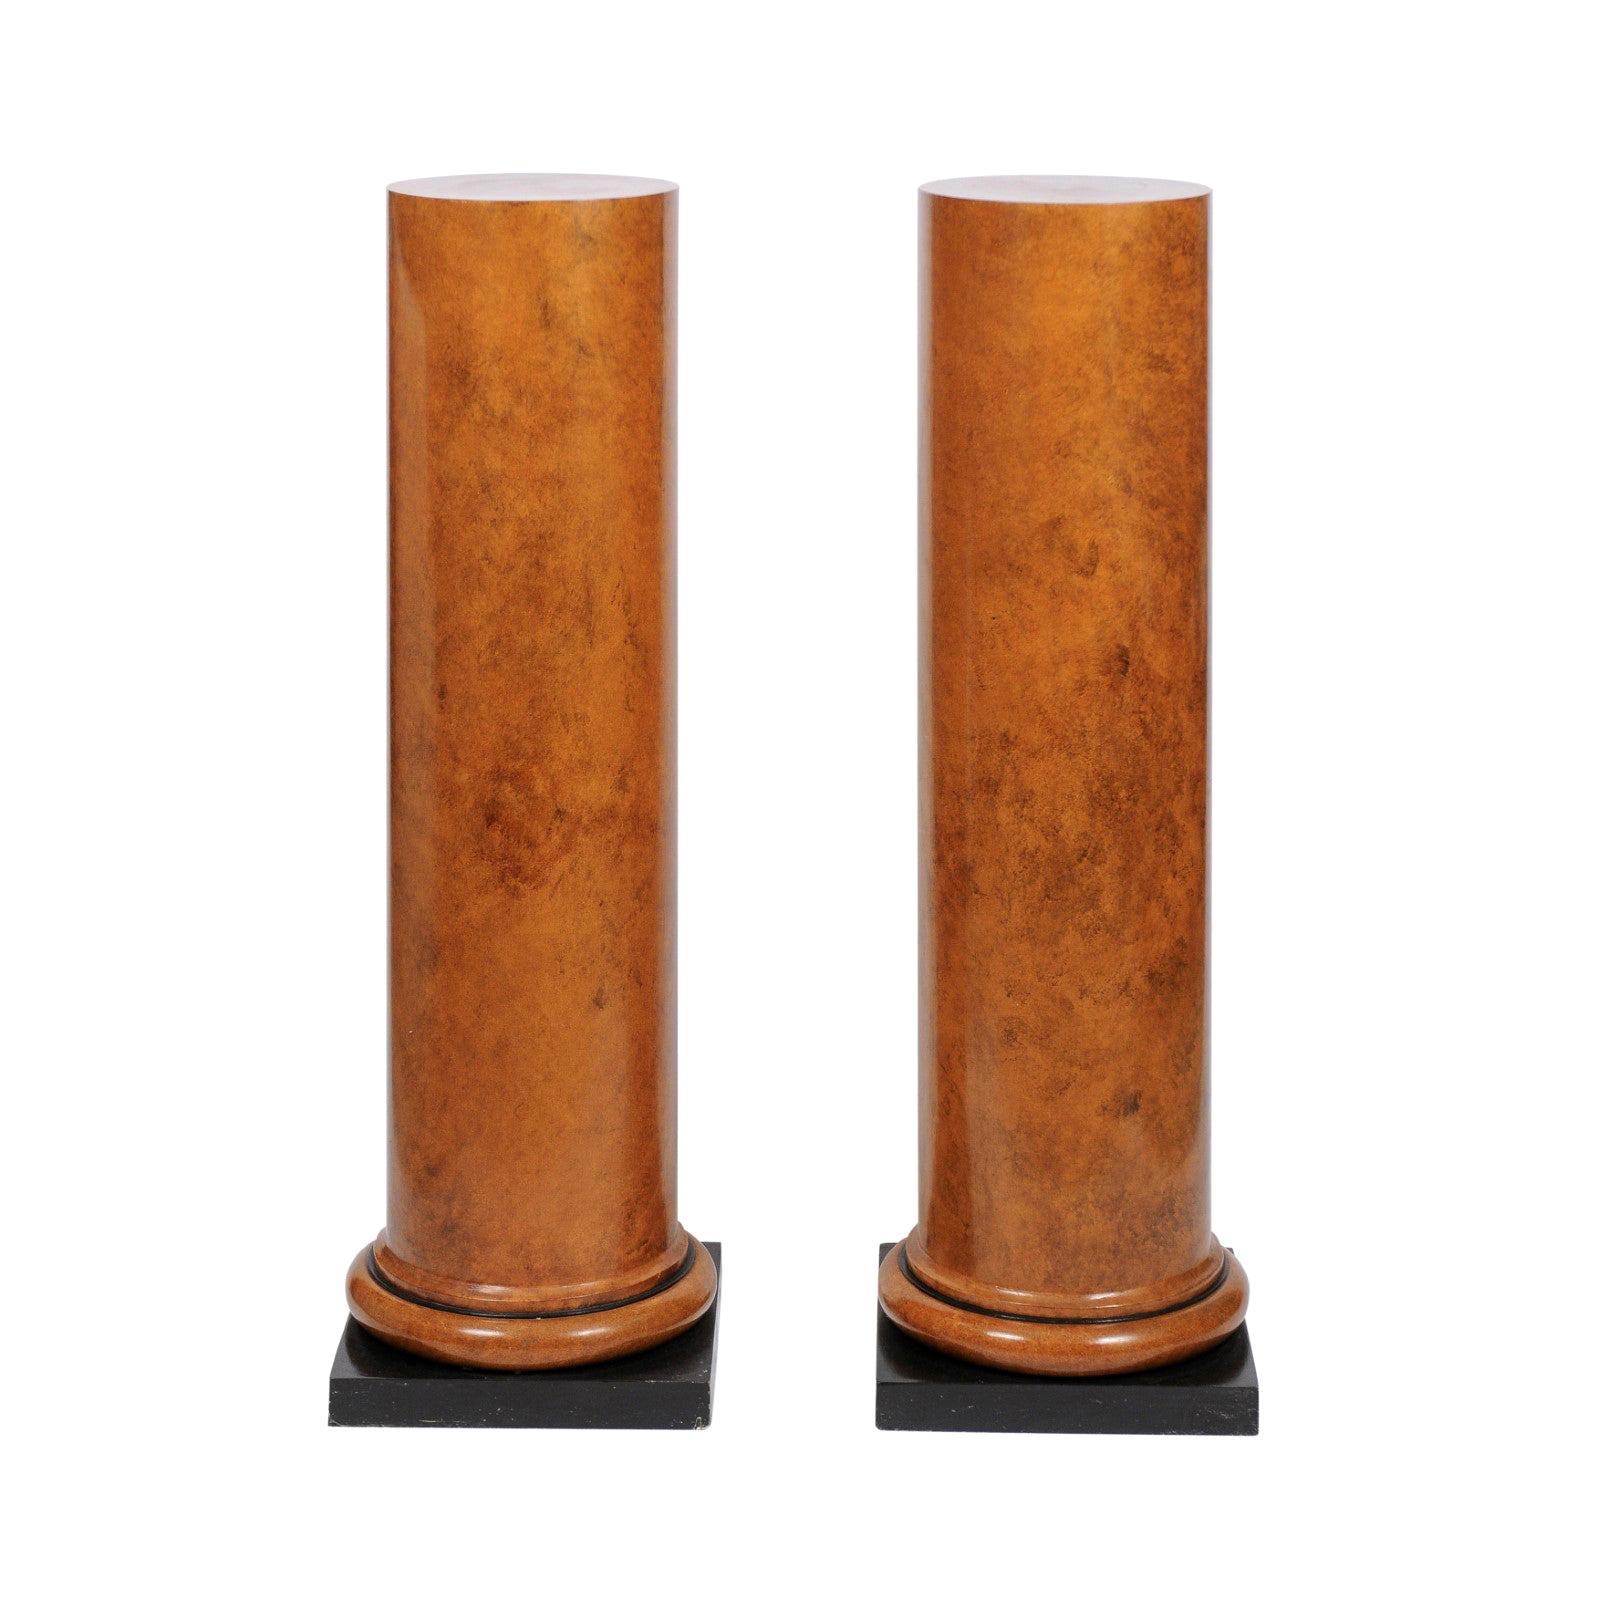 Pair of Faux Painted Art Deco Column Pedestals from the Judith Leiber Collection